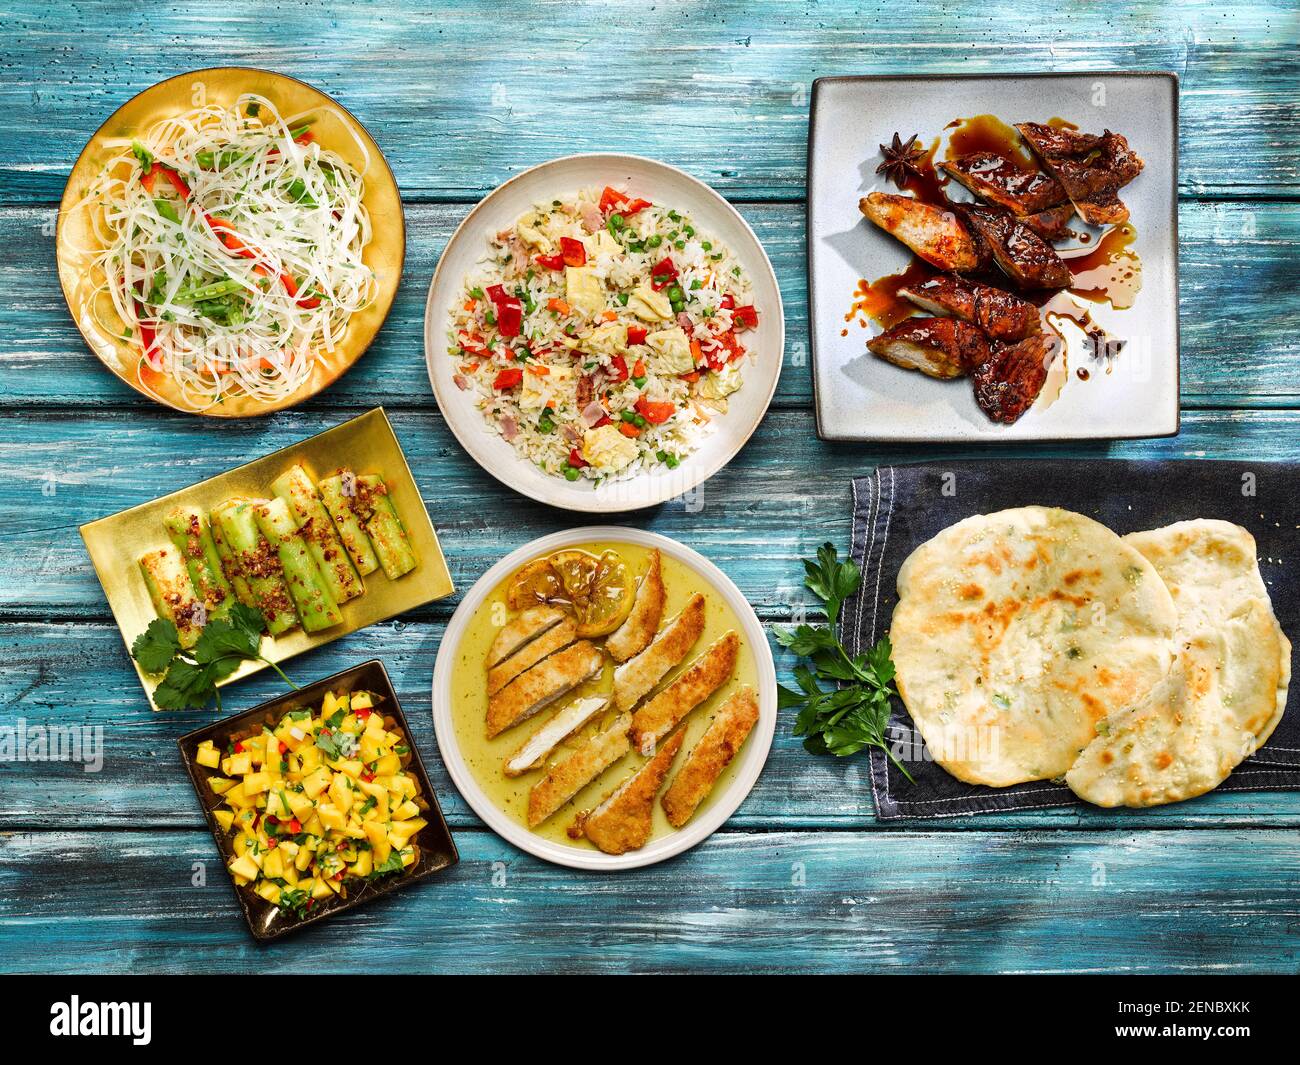 Lemon Chicken, Cucumber Salad, Special Fried Rice, Barbecued Char Sui Pork with Sticky Sauce, Asian Shredded Noodle Salad with Mango Relish Stock Photo